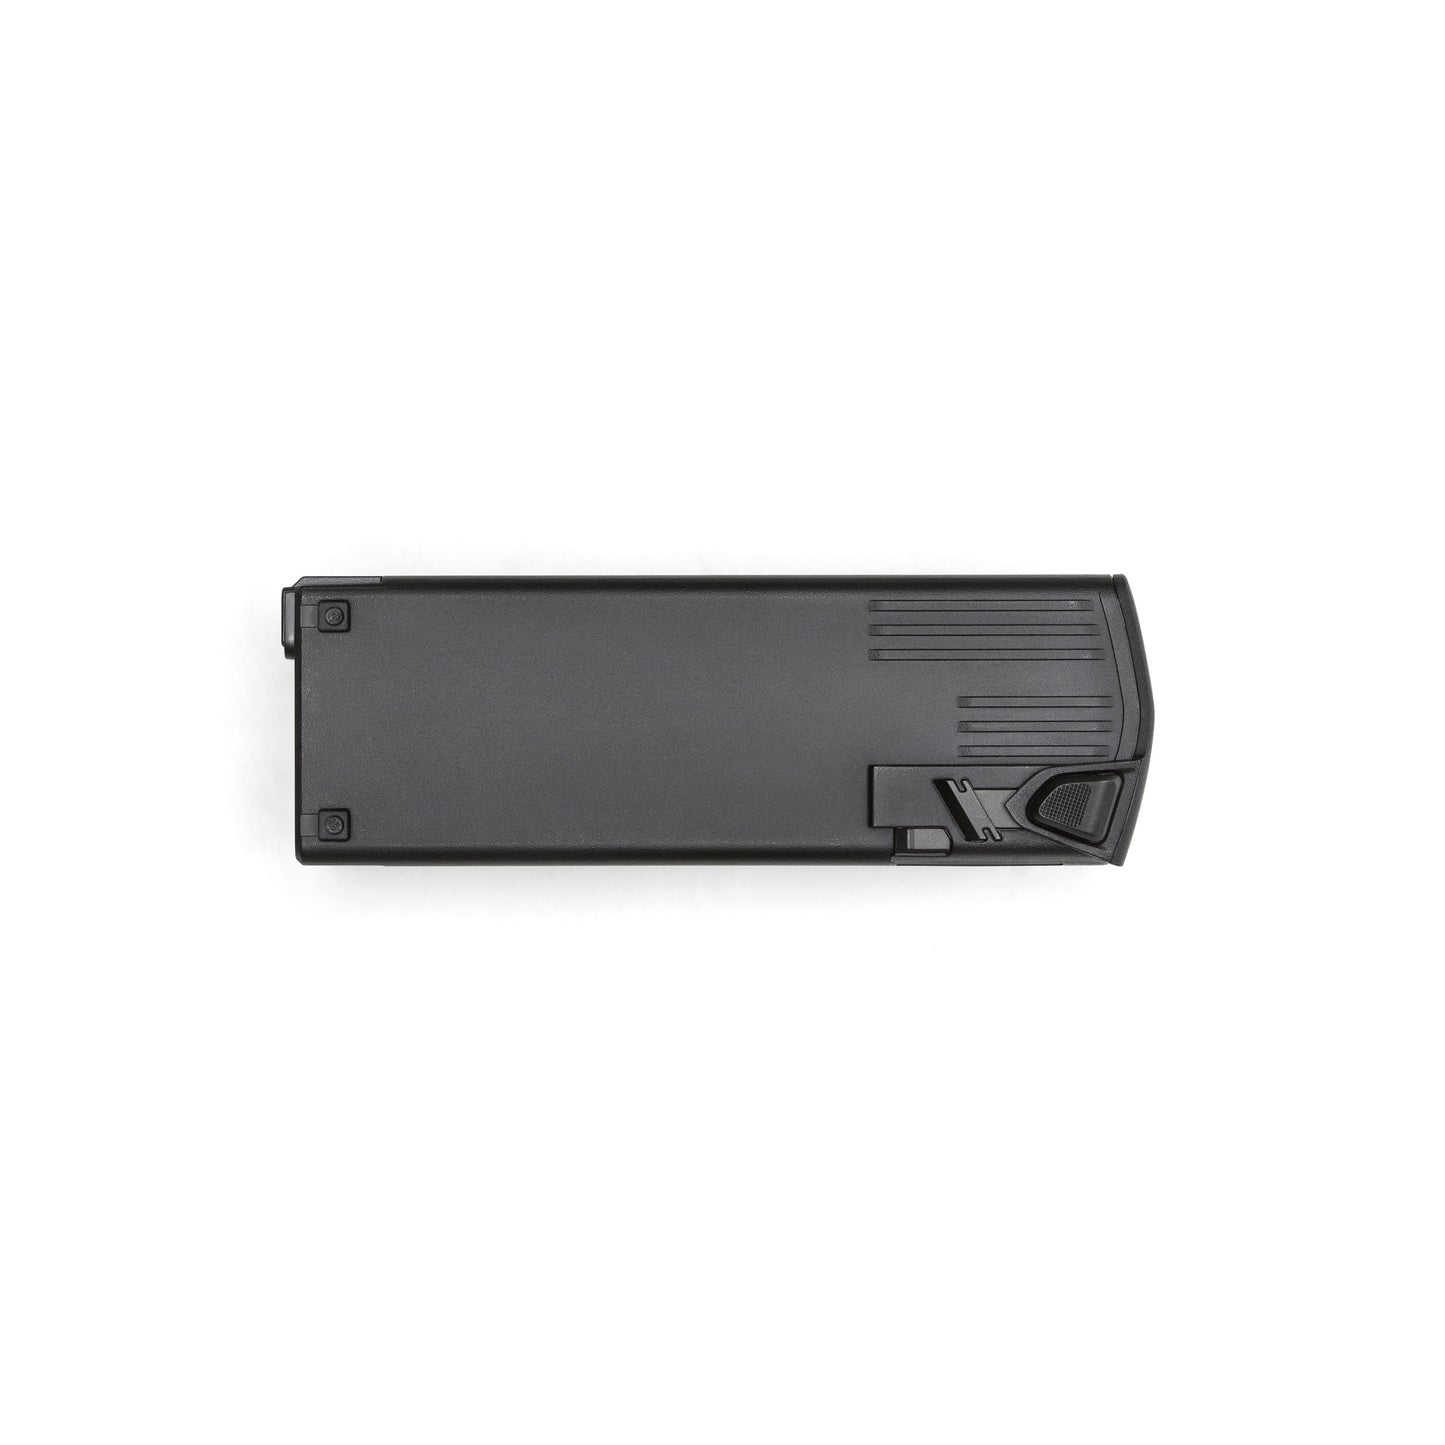 DJI Mavic 3 5000mAh Intelligent Flight Battery with Lithium-Polymer Rechargeable Power Cell for RC Drones